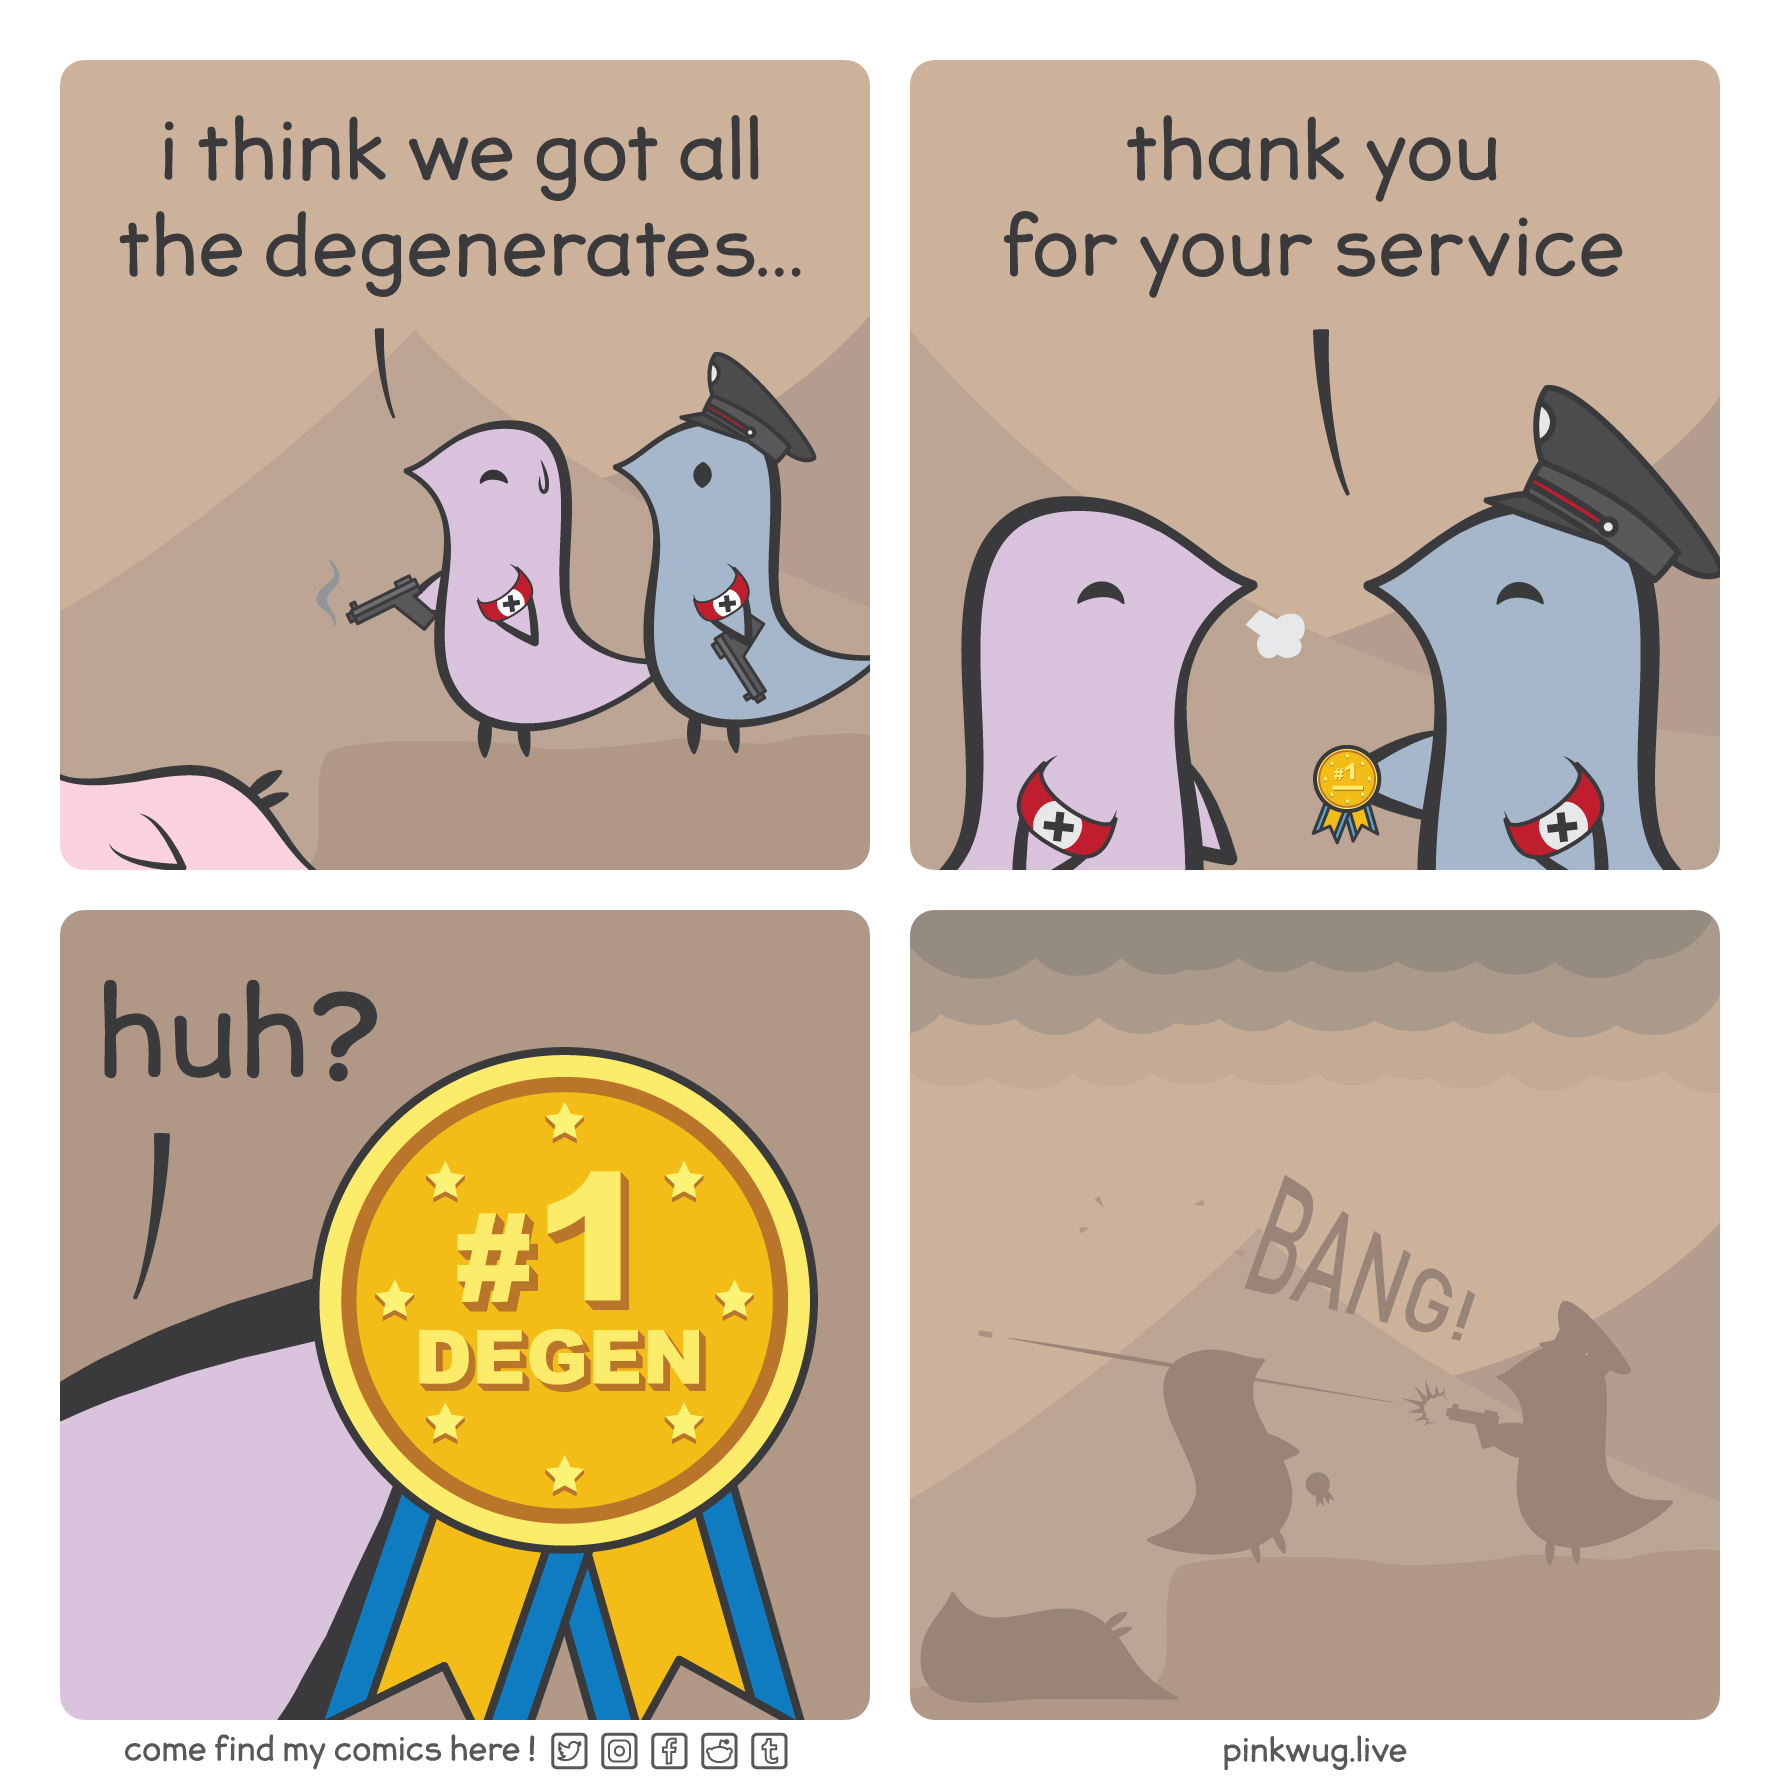 pinkwug comic: Panel 1: a pink wug is dead in a ditch. A purple nazi wug, holding a smoking gun, standing along side a grey nazi wug, says: "i think we got all the degenerates..."

Panel 2: the grey wug says: "thank you for your service" and hands the purple wug a medal. The purple wug is relieved.

Panel 3: the purple wug reads the medal that says "#1 degen" and is confused.

Panel 4: we see the shadow of the grey wug shooting the purple wug. The purple wug is falling into the ditch.